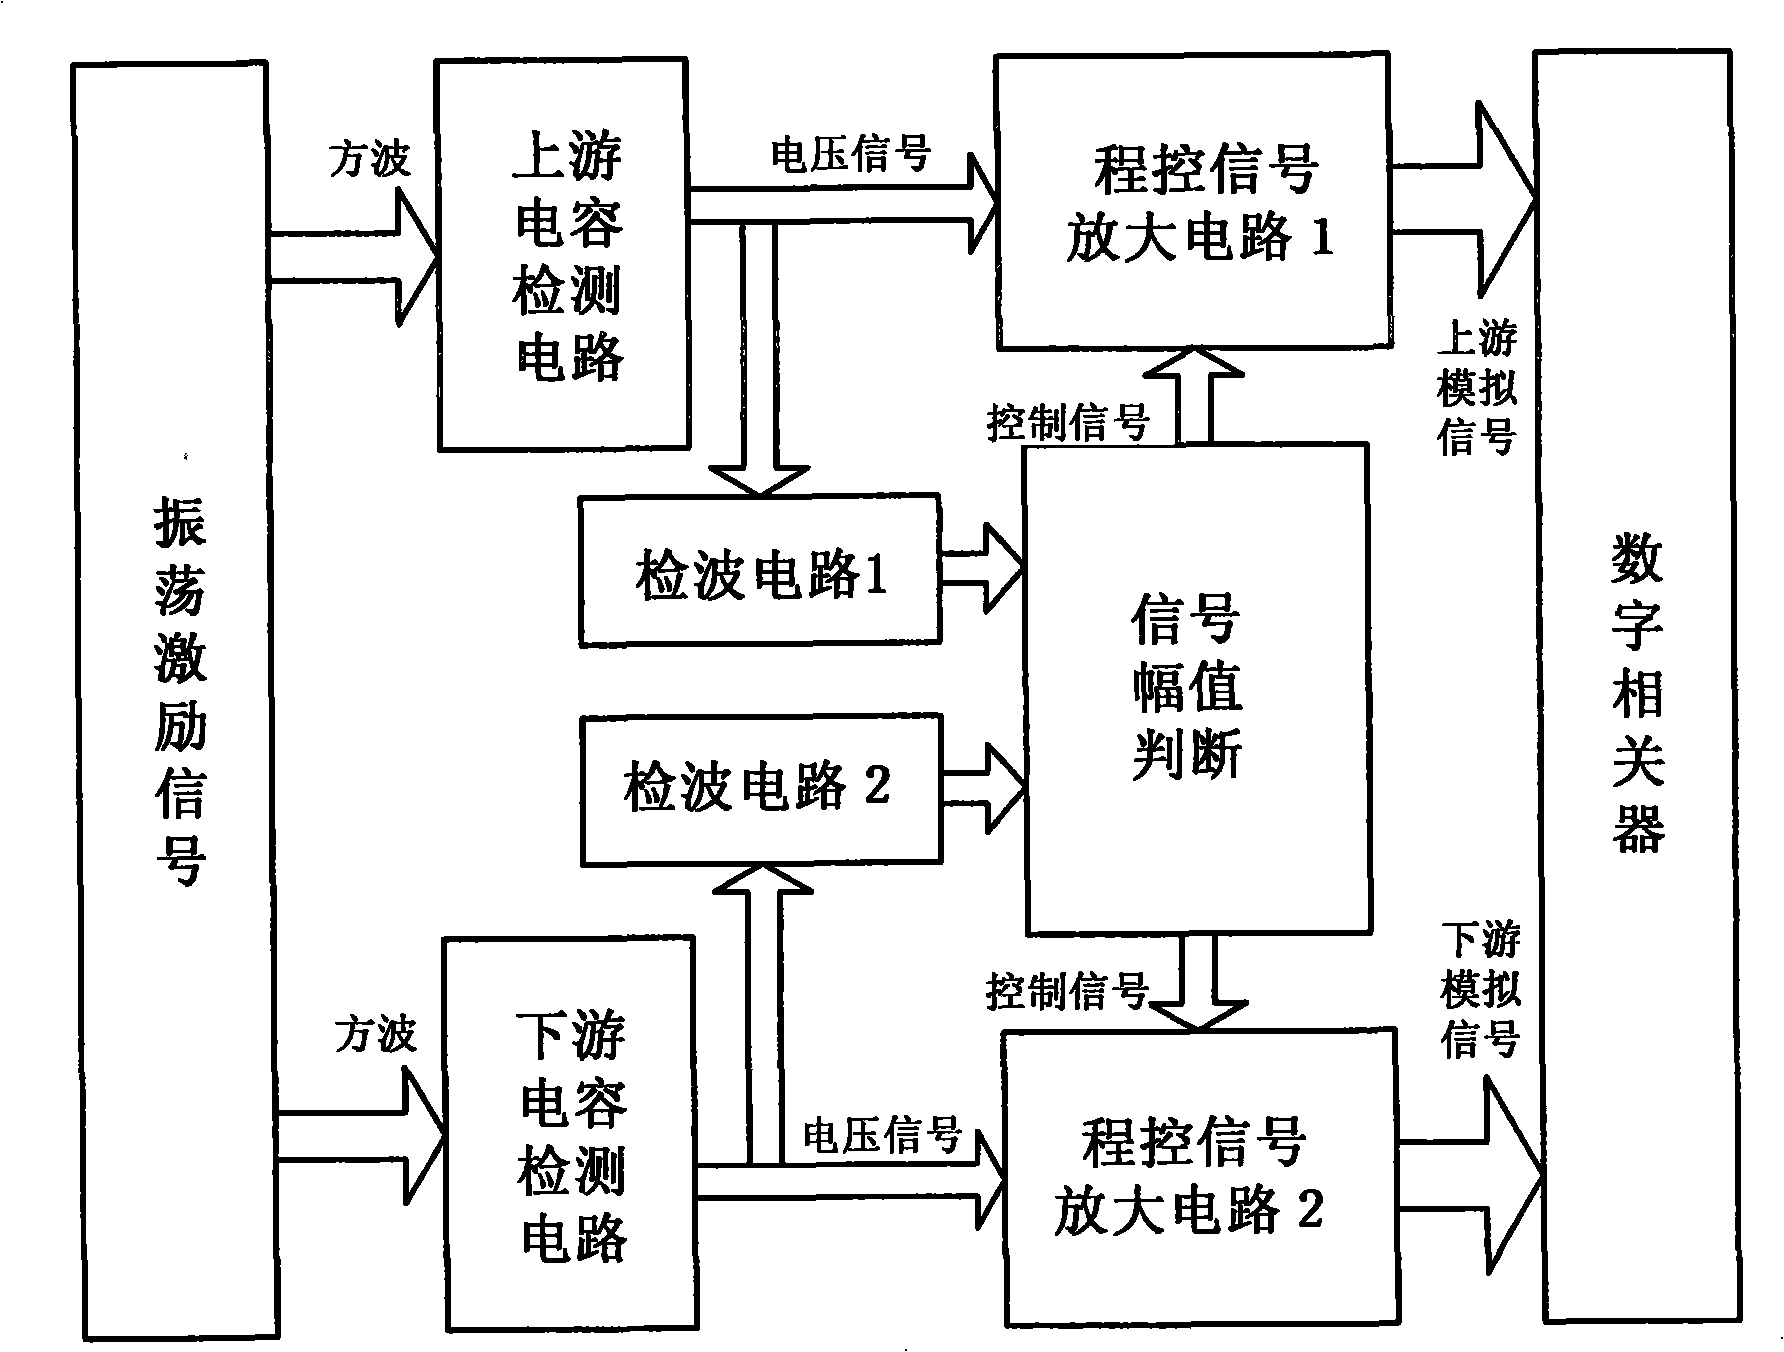 Dual inside-and-outside ring capacitance sensor and two-phase flow speed related measuring system